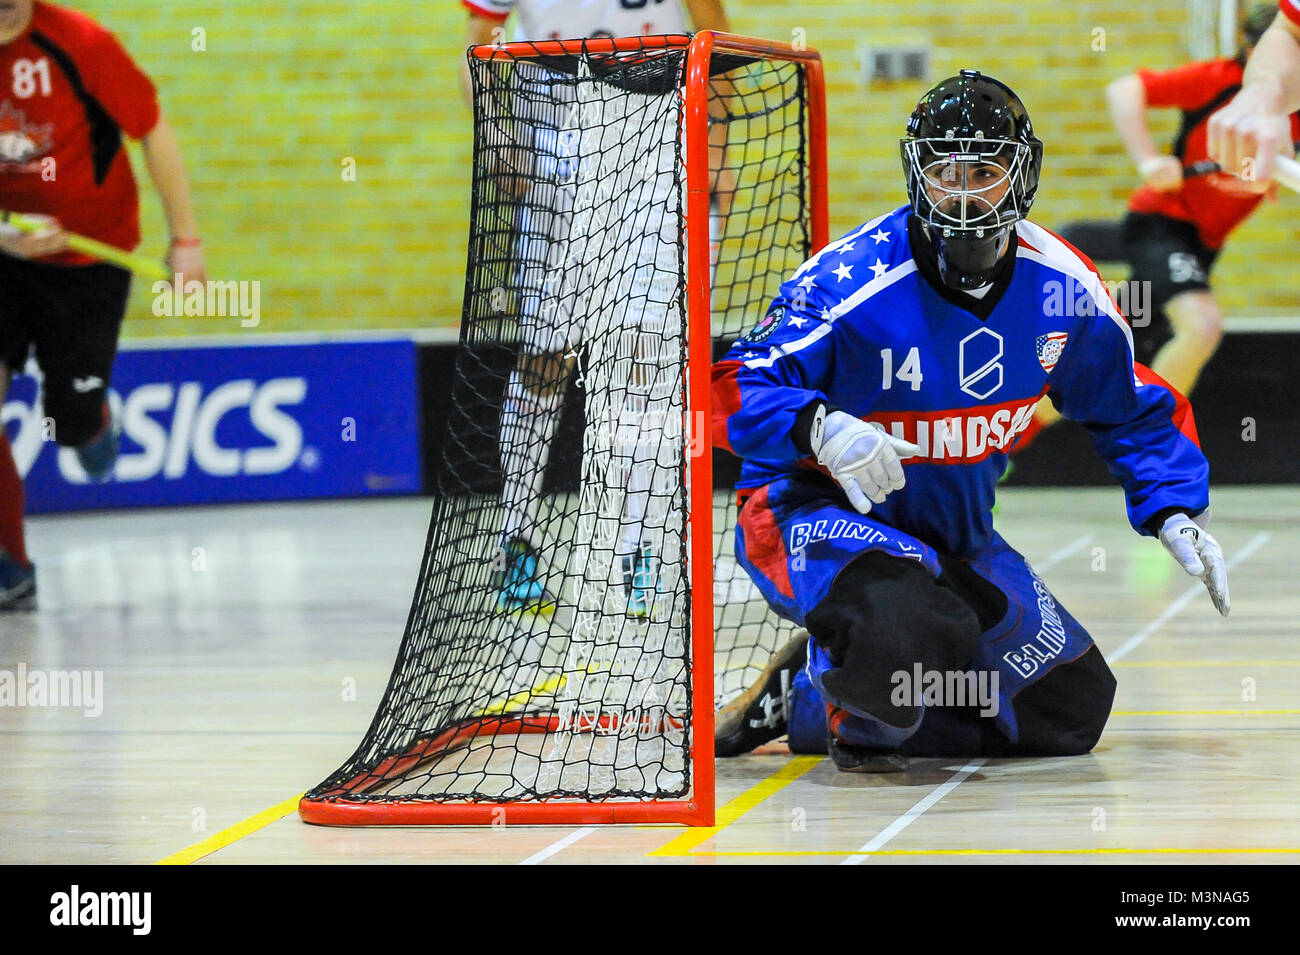 February 10, 2018 - Toronto, Ontario, Canada. Keener Cam (Goalkeeper) in  action during the USA vs Canada floorball national team match Stock Photo -  Alamy